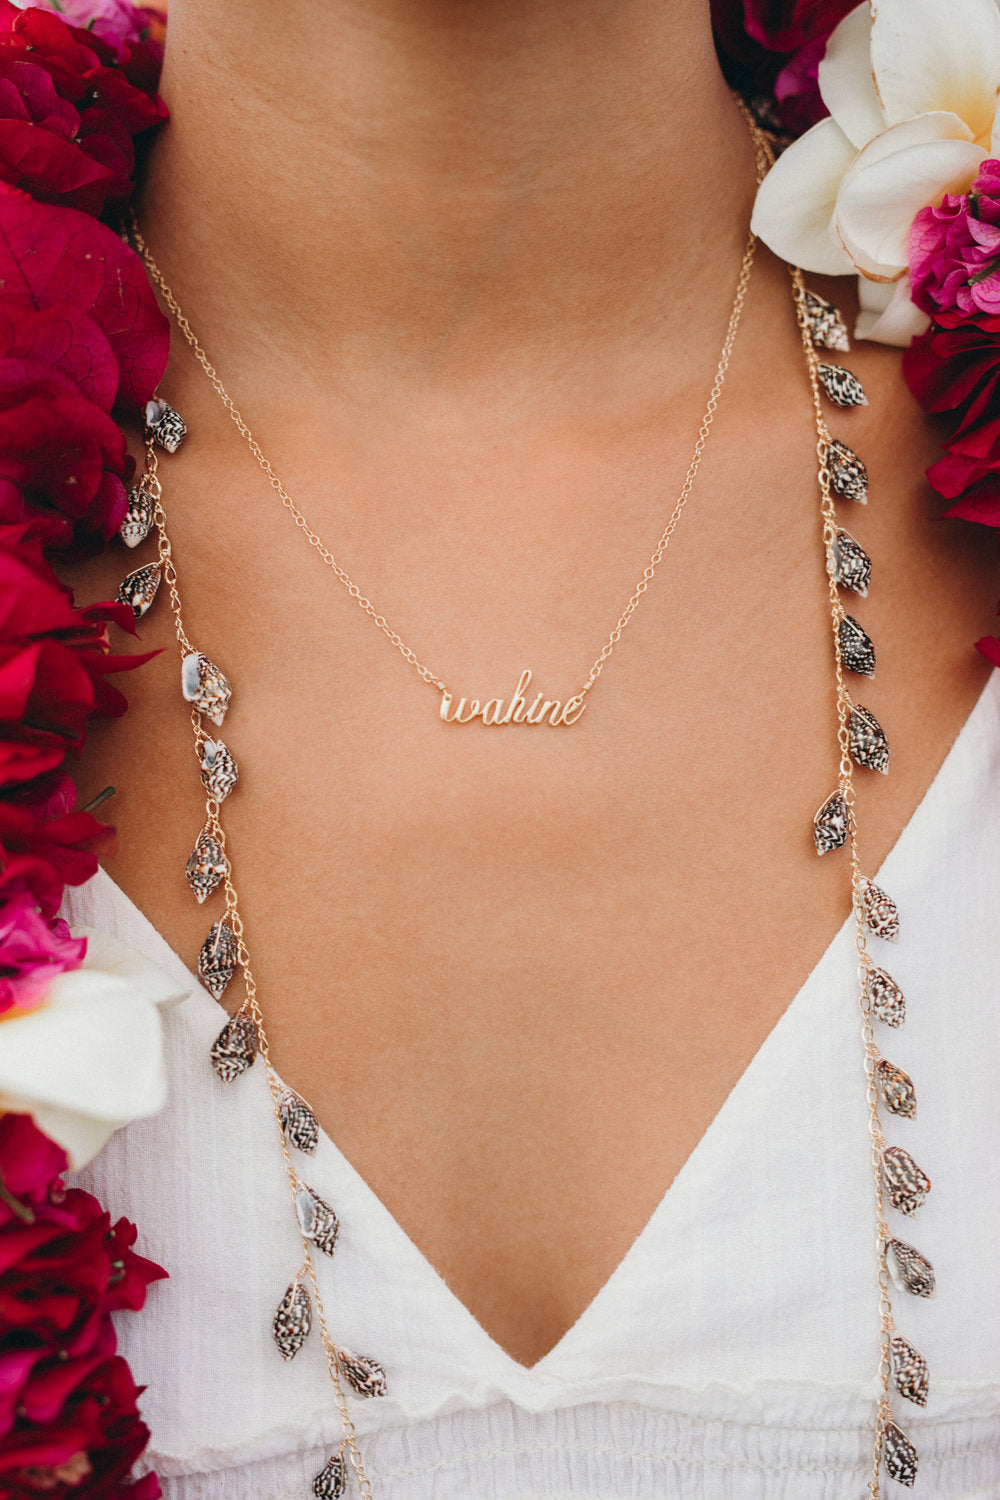 Small Wahine necklace